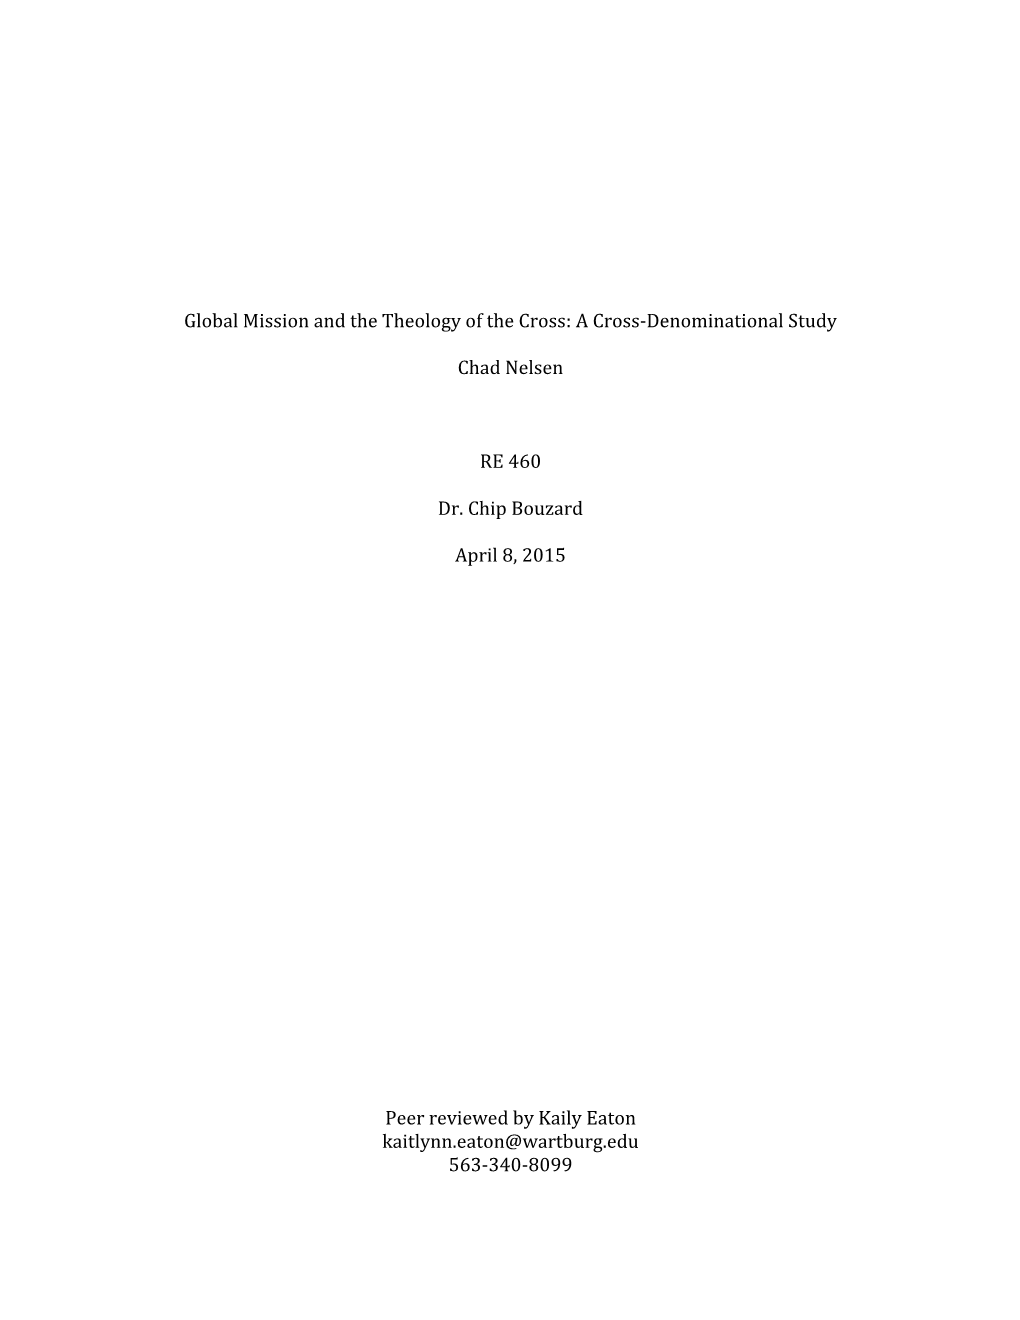 Global Mission and the Theology of the Cross: a Cross-Denominational Study